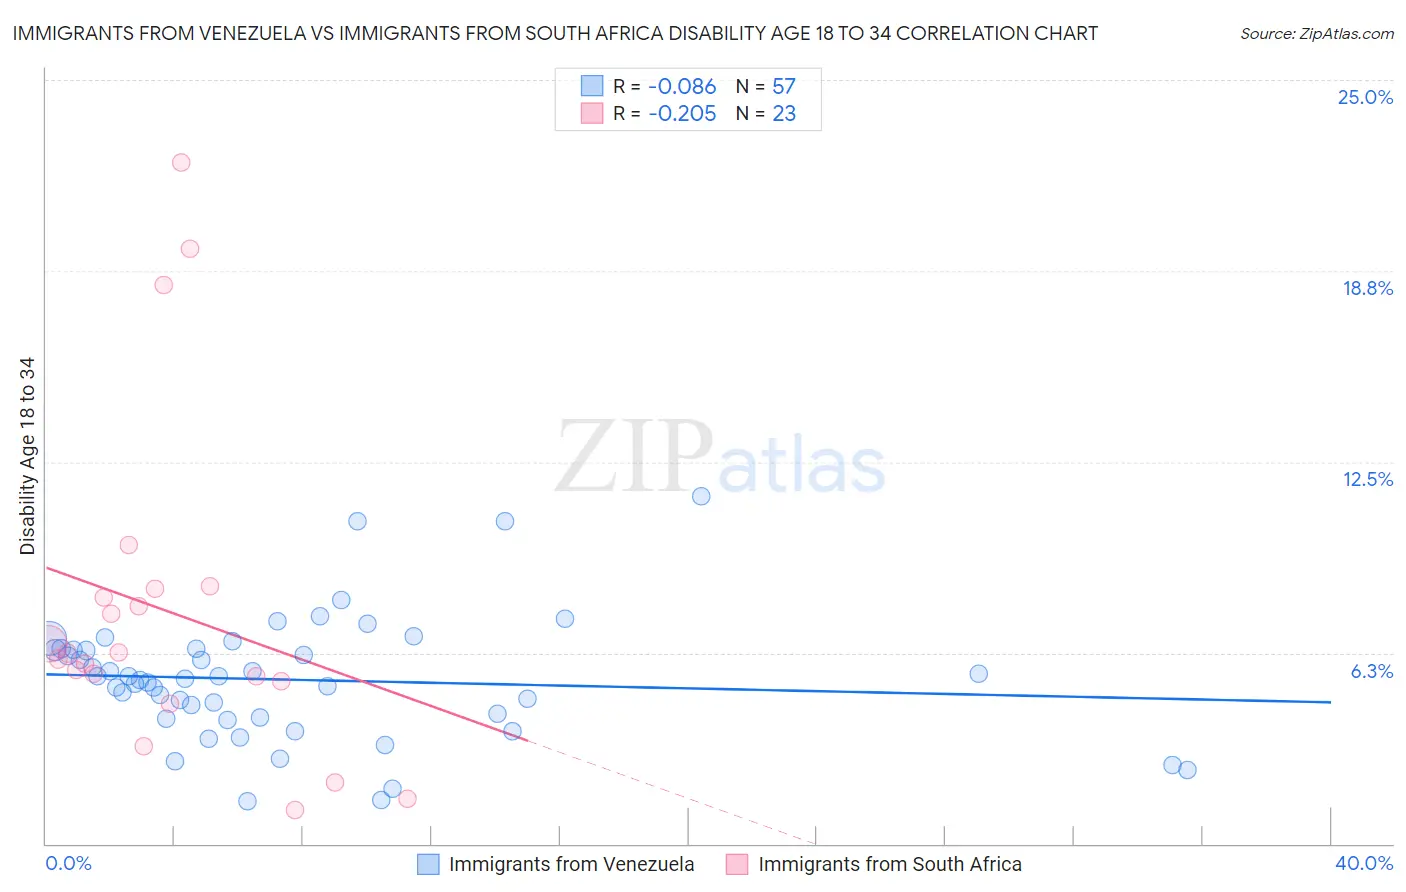 Immigrants from Venezuela vs Immigrants from South Africa Disability Age 18 to 34